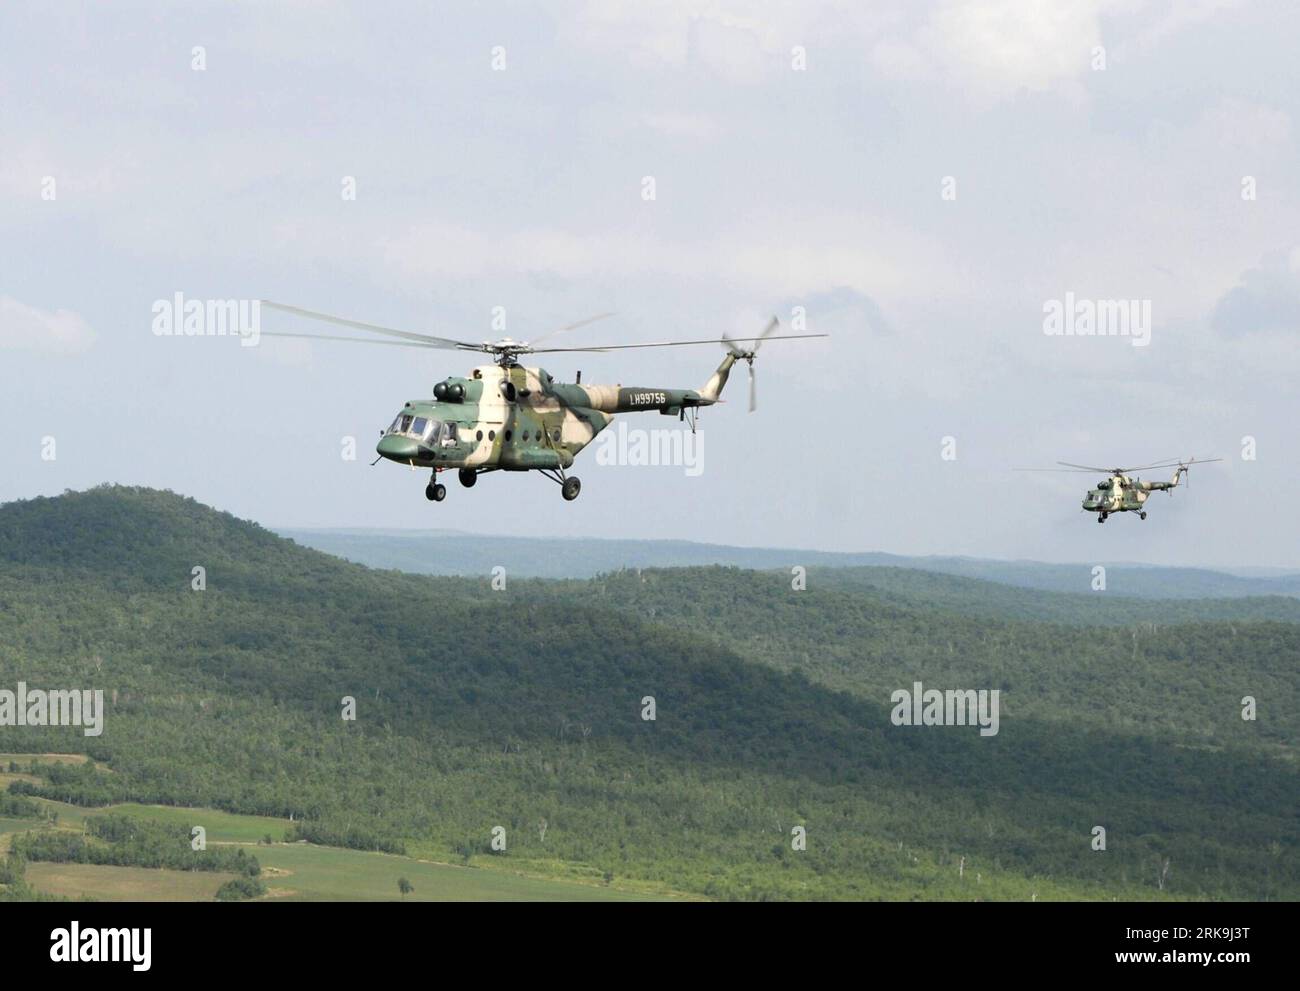 Bildnummer: 54200422  Datum: 03.07.2010  Copyright: imago/Xinhua (100703) -- GREATER HINGGAN MOUNTAINS, July 3, 2010 (Xinhua) -- A Mi-171 helicopter from Shenyang military command fly for the task of fighting against forest fire ravaging the Greater Hinggan Mountains on July 3, 2010. A forest fire was mostly put out Saturday after ravaging the Greater Hinggan Mountains in north China s Inner Mongolian Autonomous Region and Heilongjiang Province for a week, fire fighters said. (Xinhua/Wang Song) (zx) (3)CHINA-GREATER HINGGAN MOUNTAINS-FOREST FIRE-MI-171 HELICOPTERS PUBLICATIONxNOTxINxCHN Gesell Stock Photo